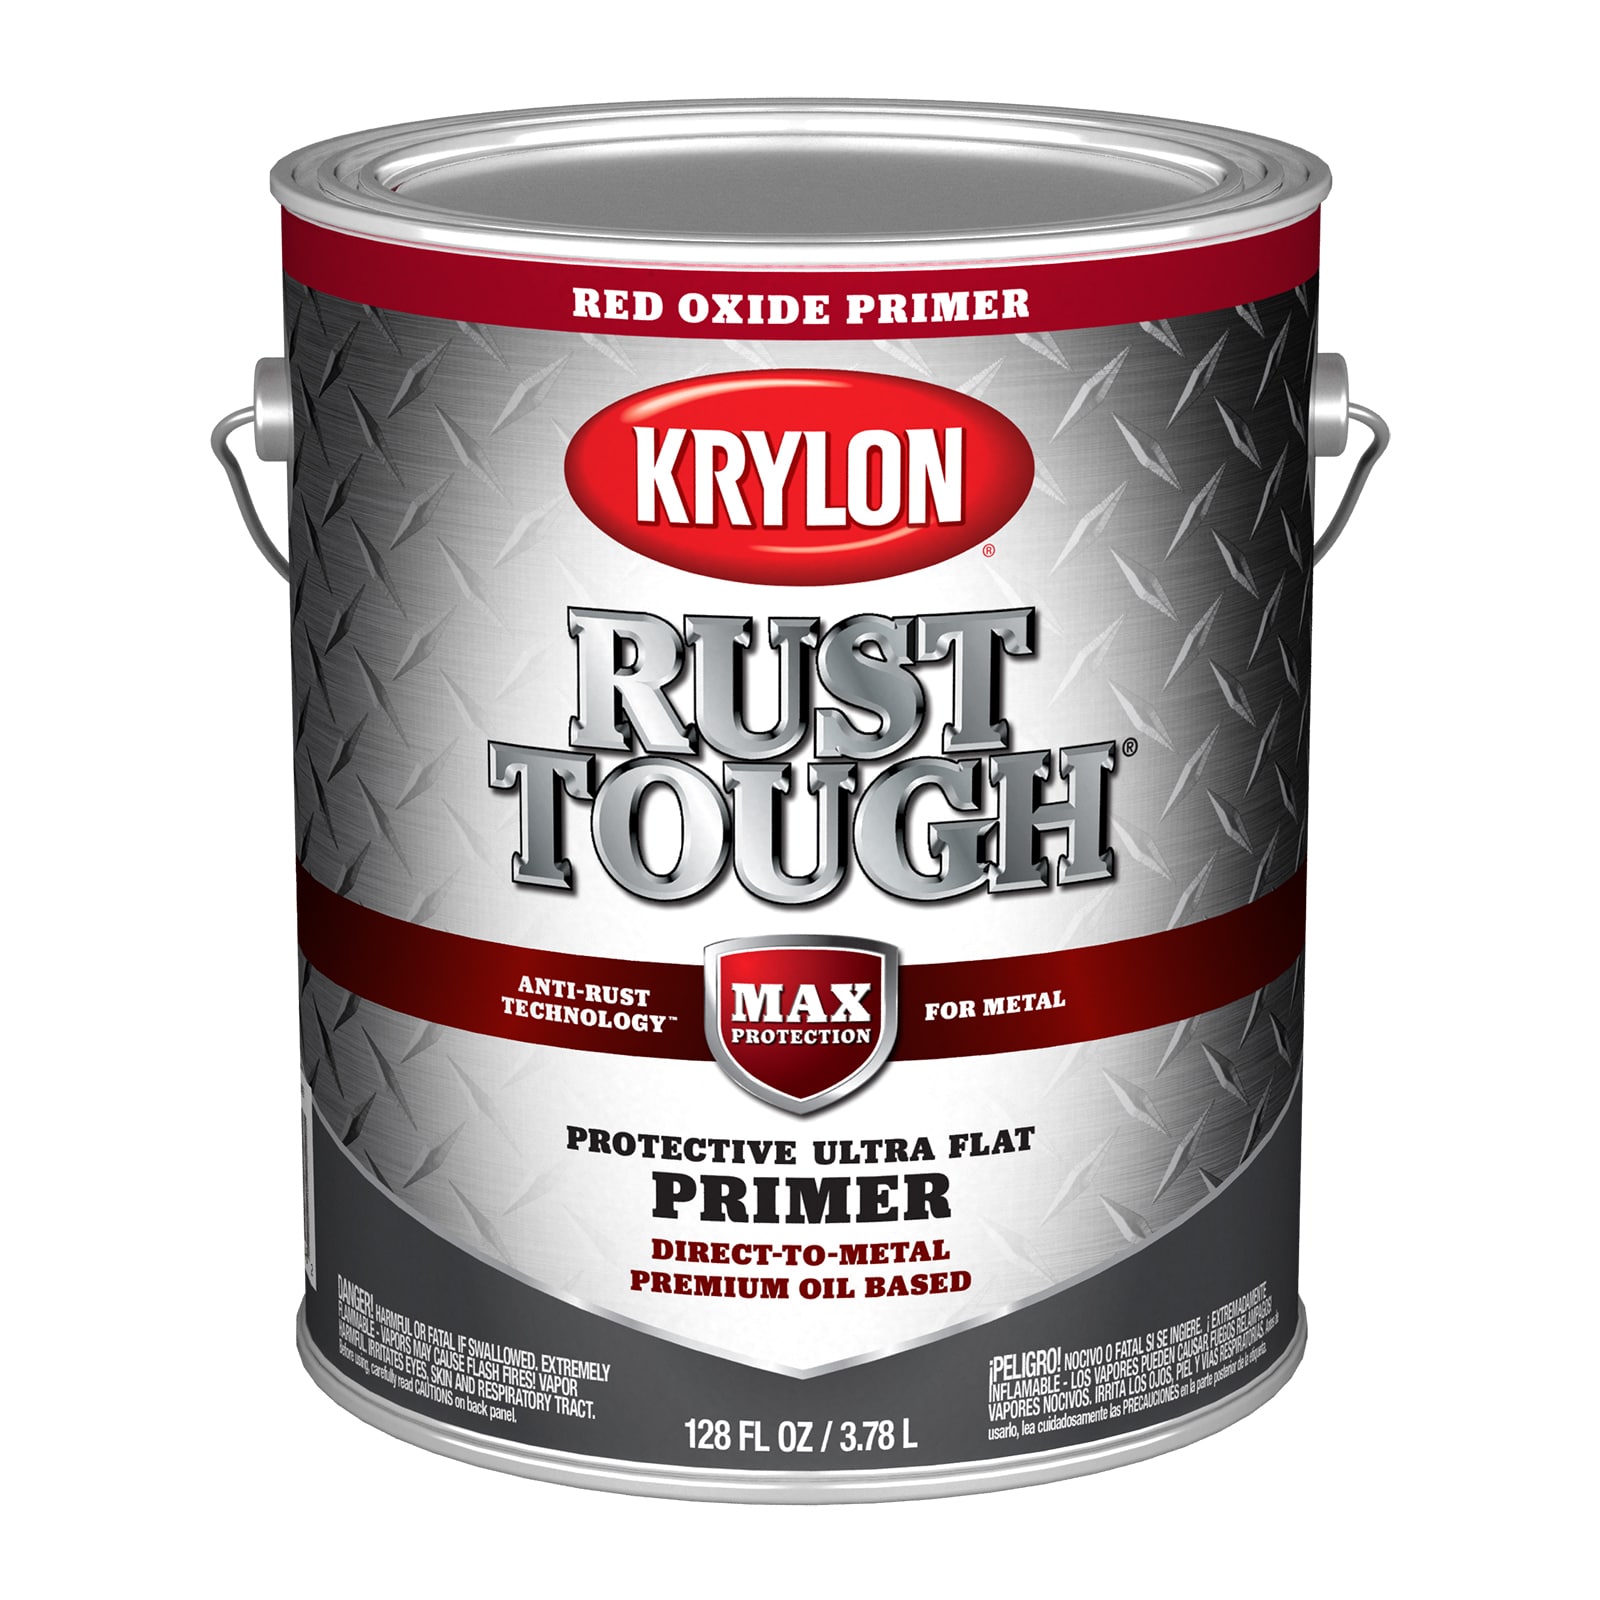 Richard's® Rust Shield Red Oxide Metal Primer (1015) — Stein Paint Company